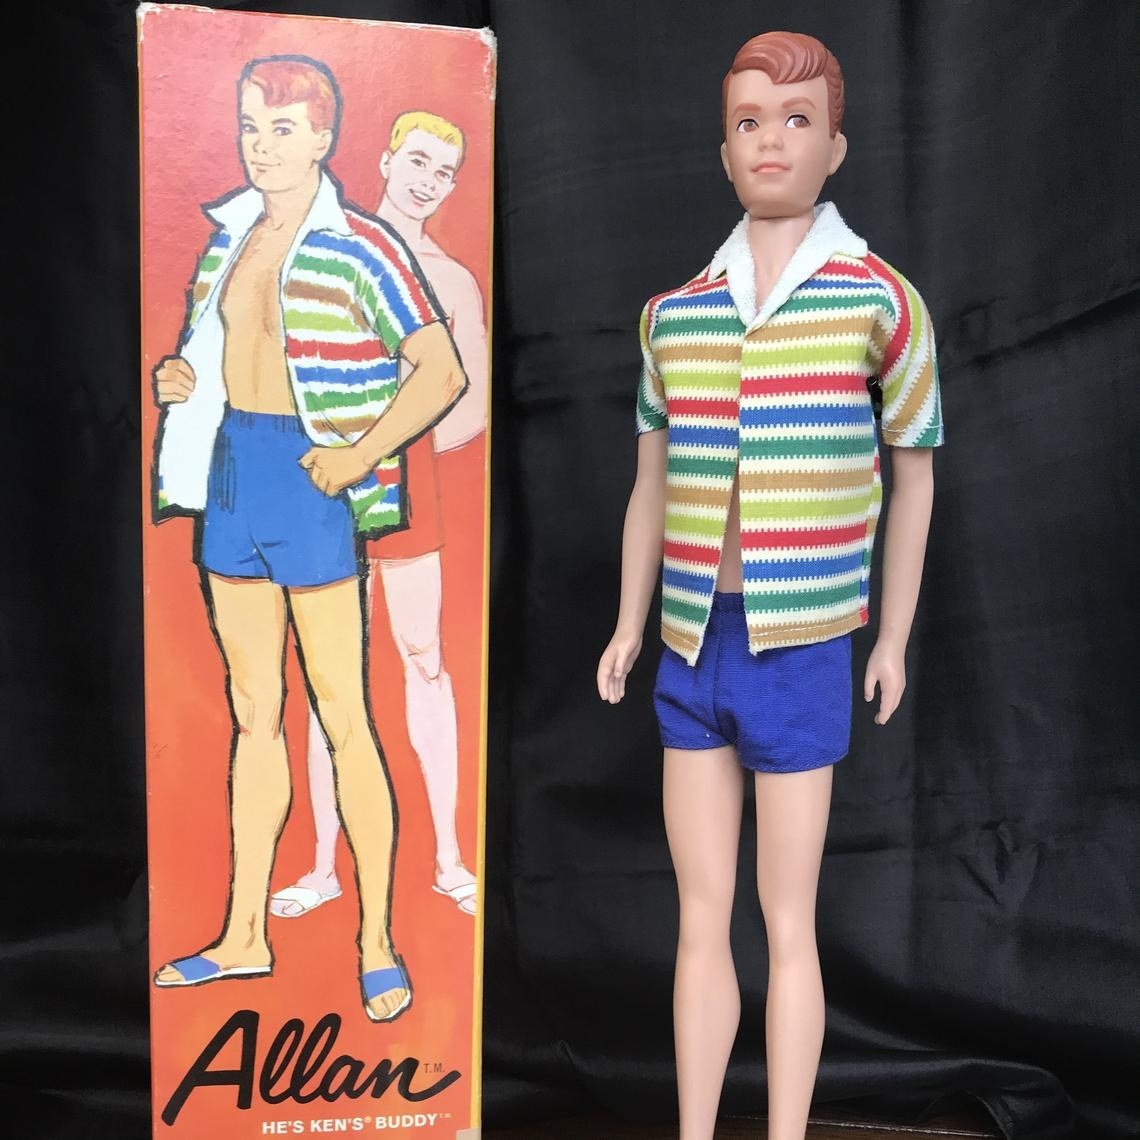 An Allan doll out his box wearing a blue swimsuit and stripped towel shirt